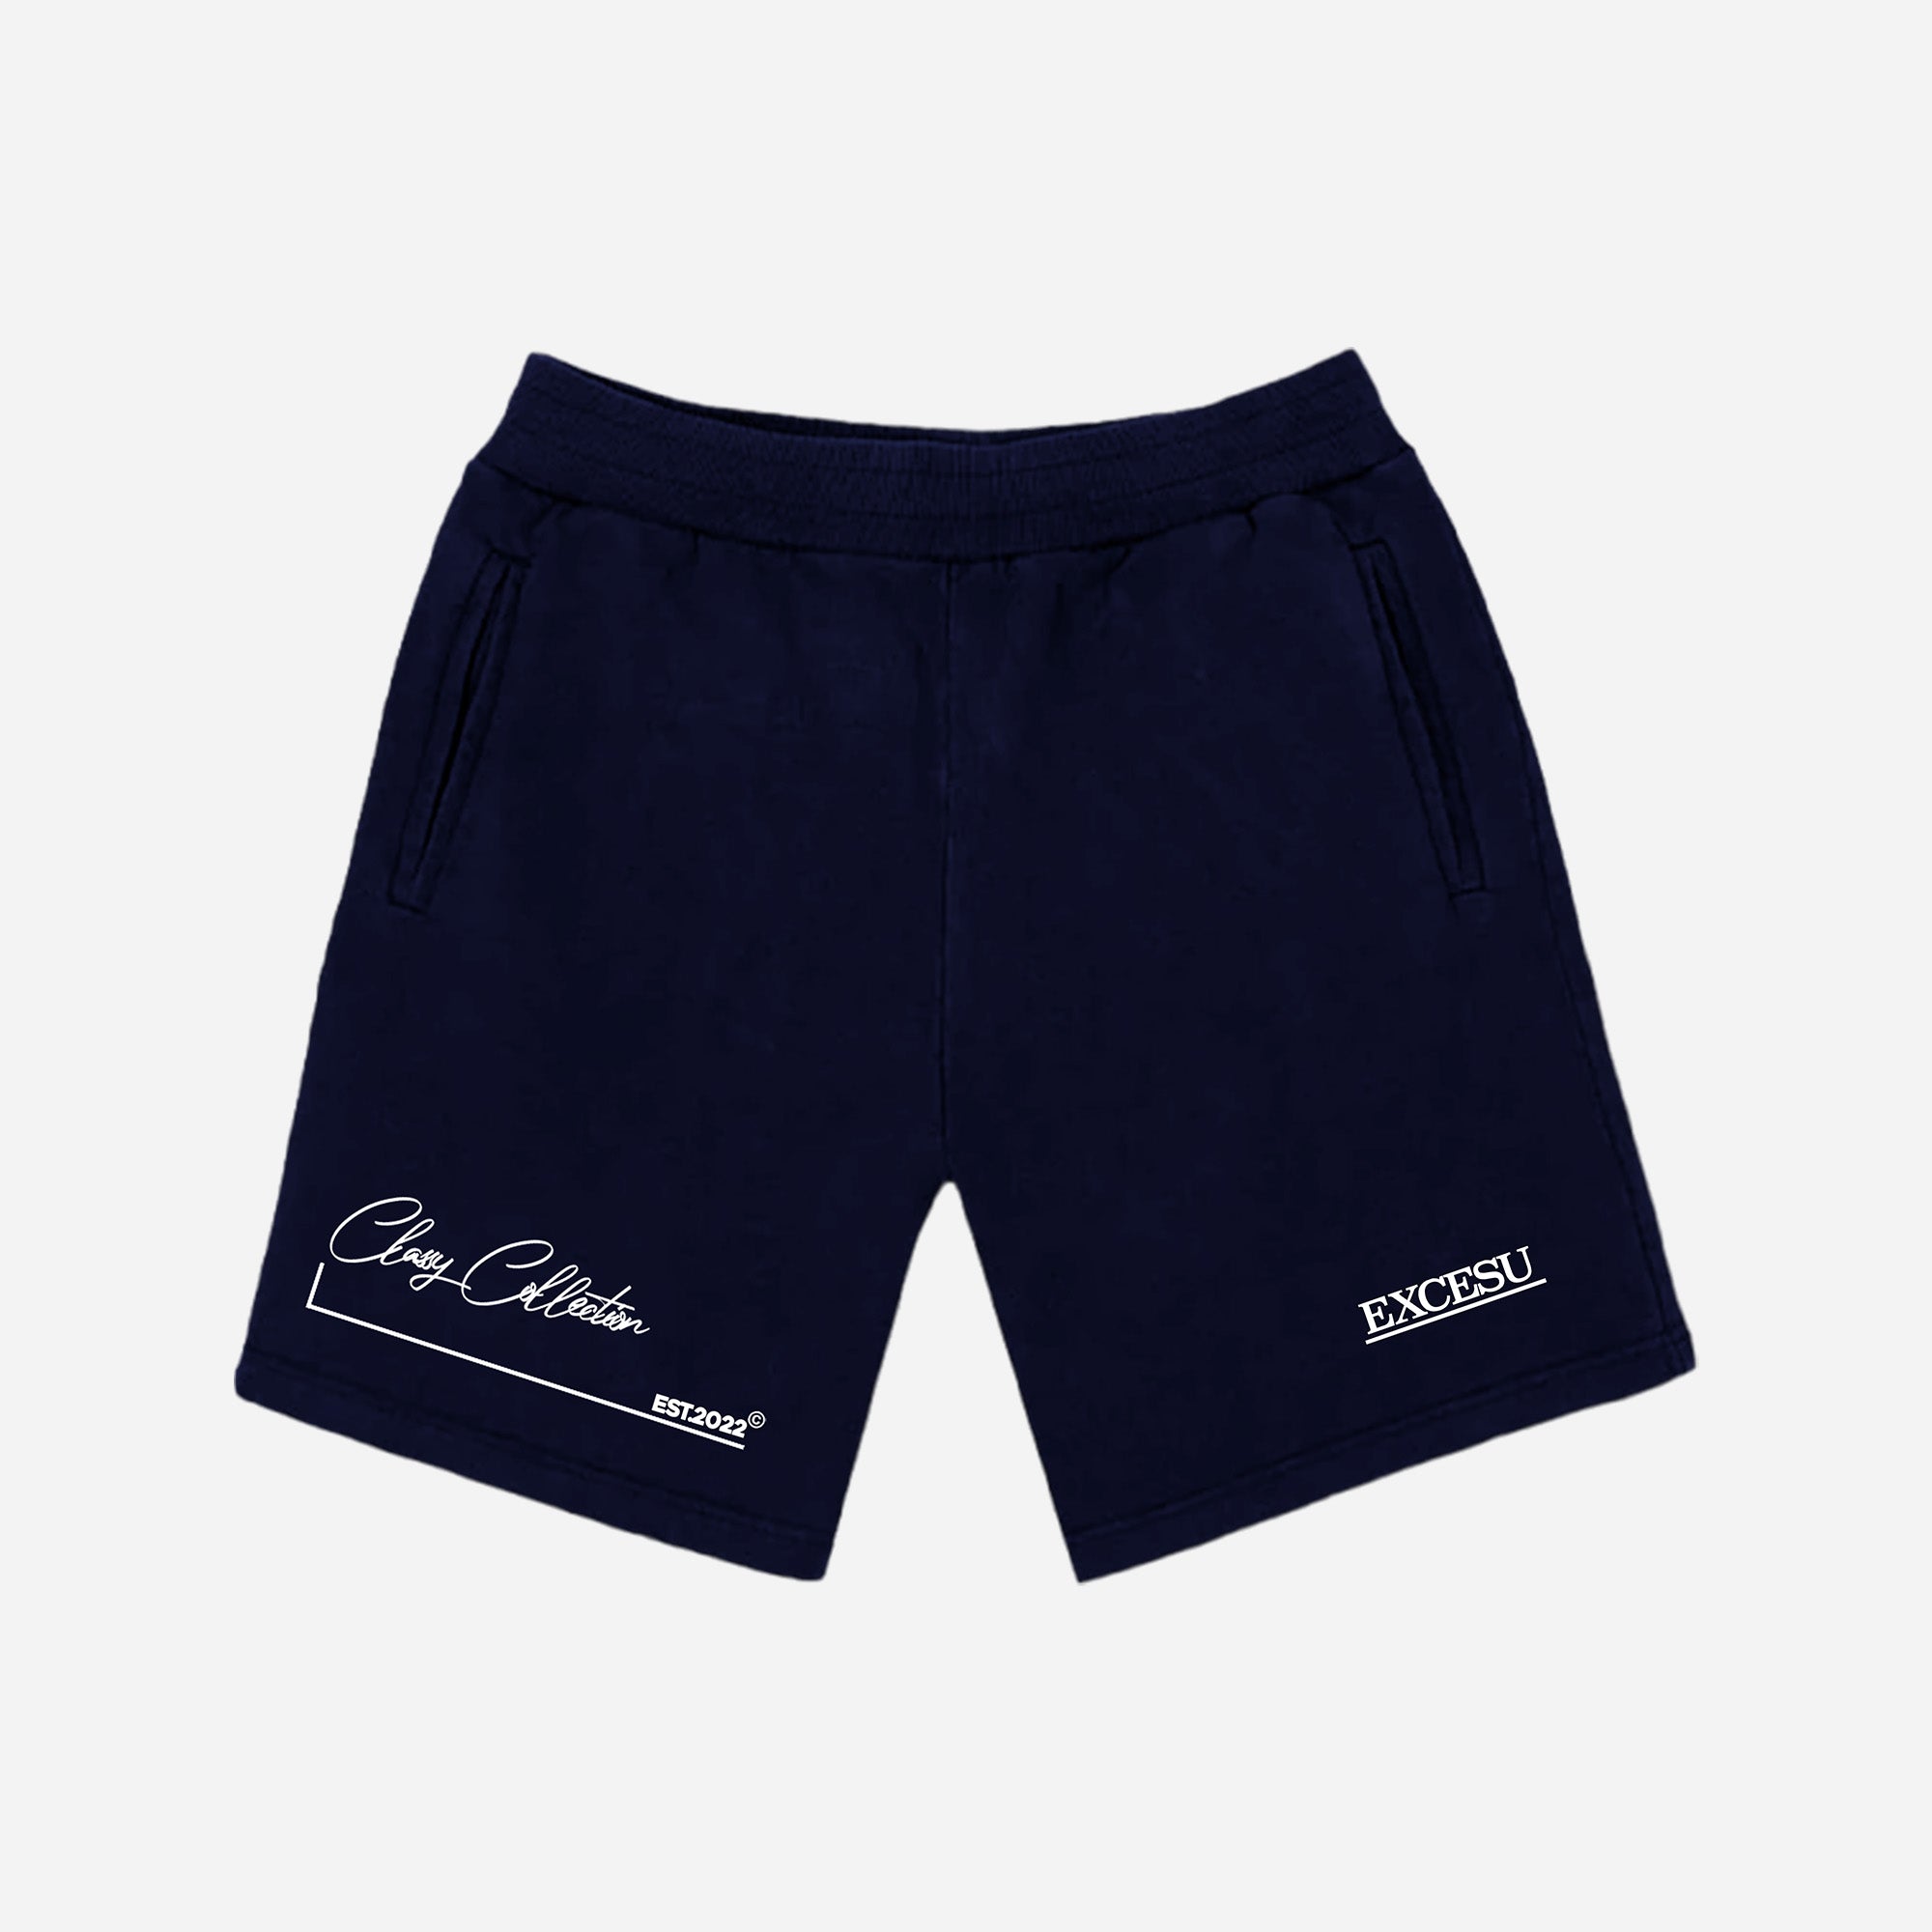 EXCESU FRENCH TERRY NAVY SHORTS Excesu